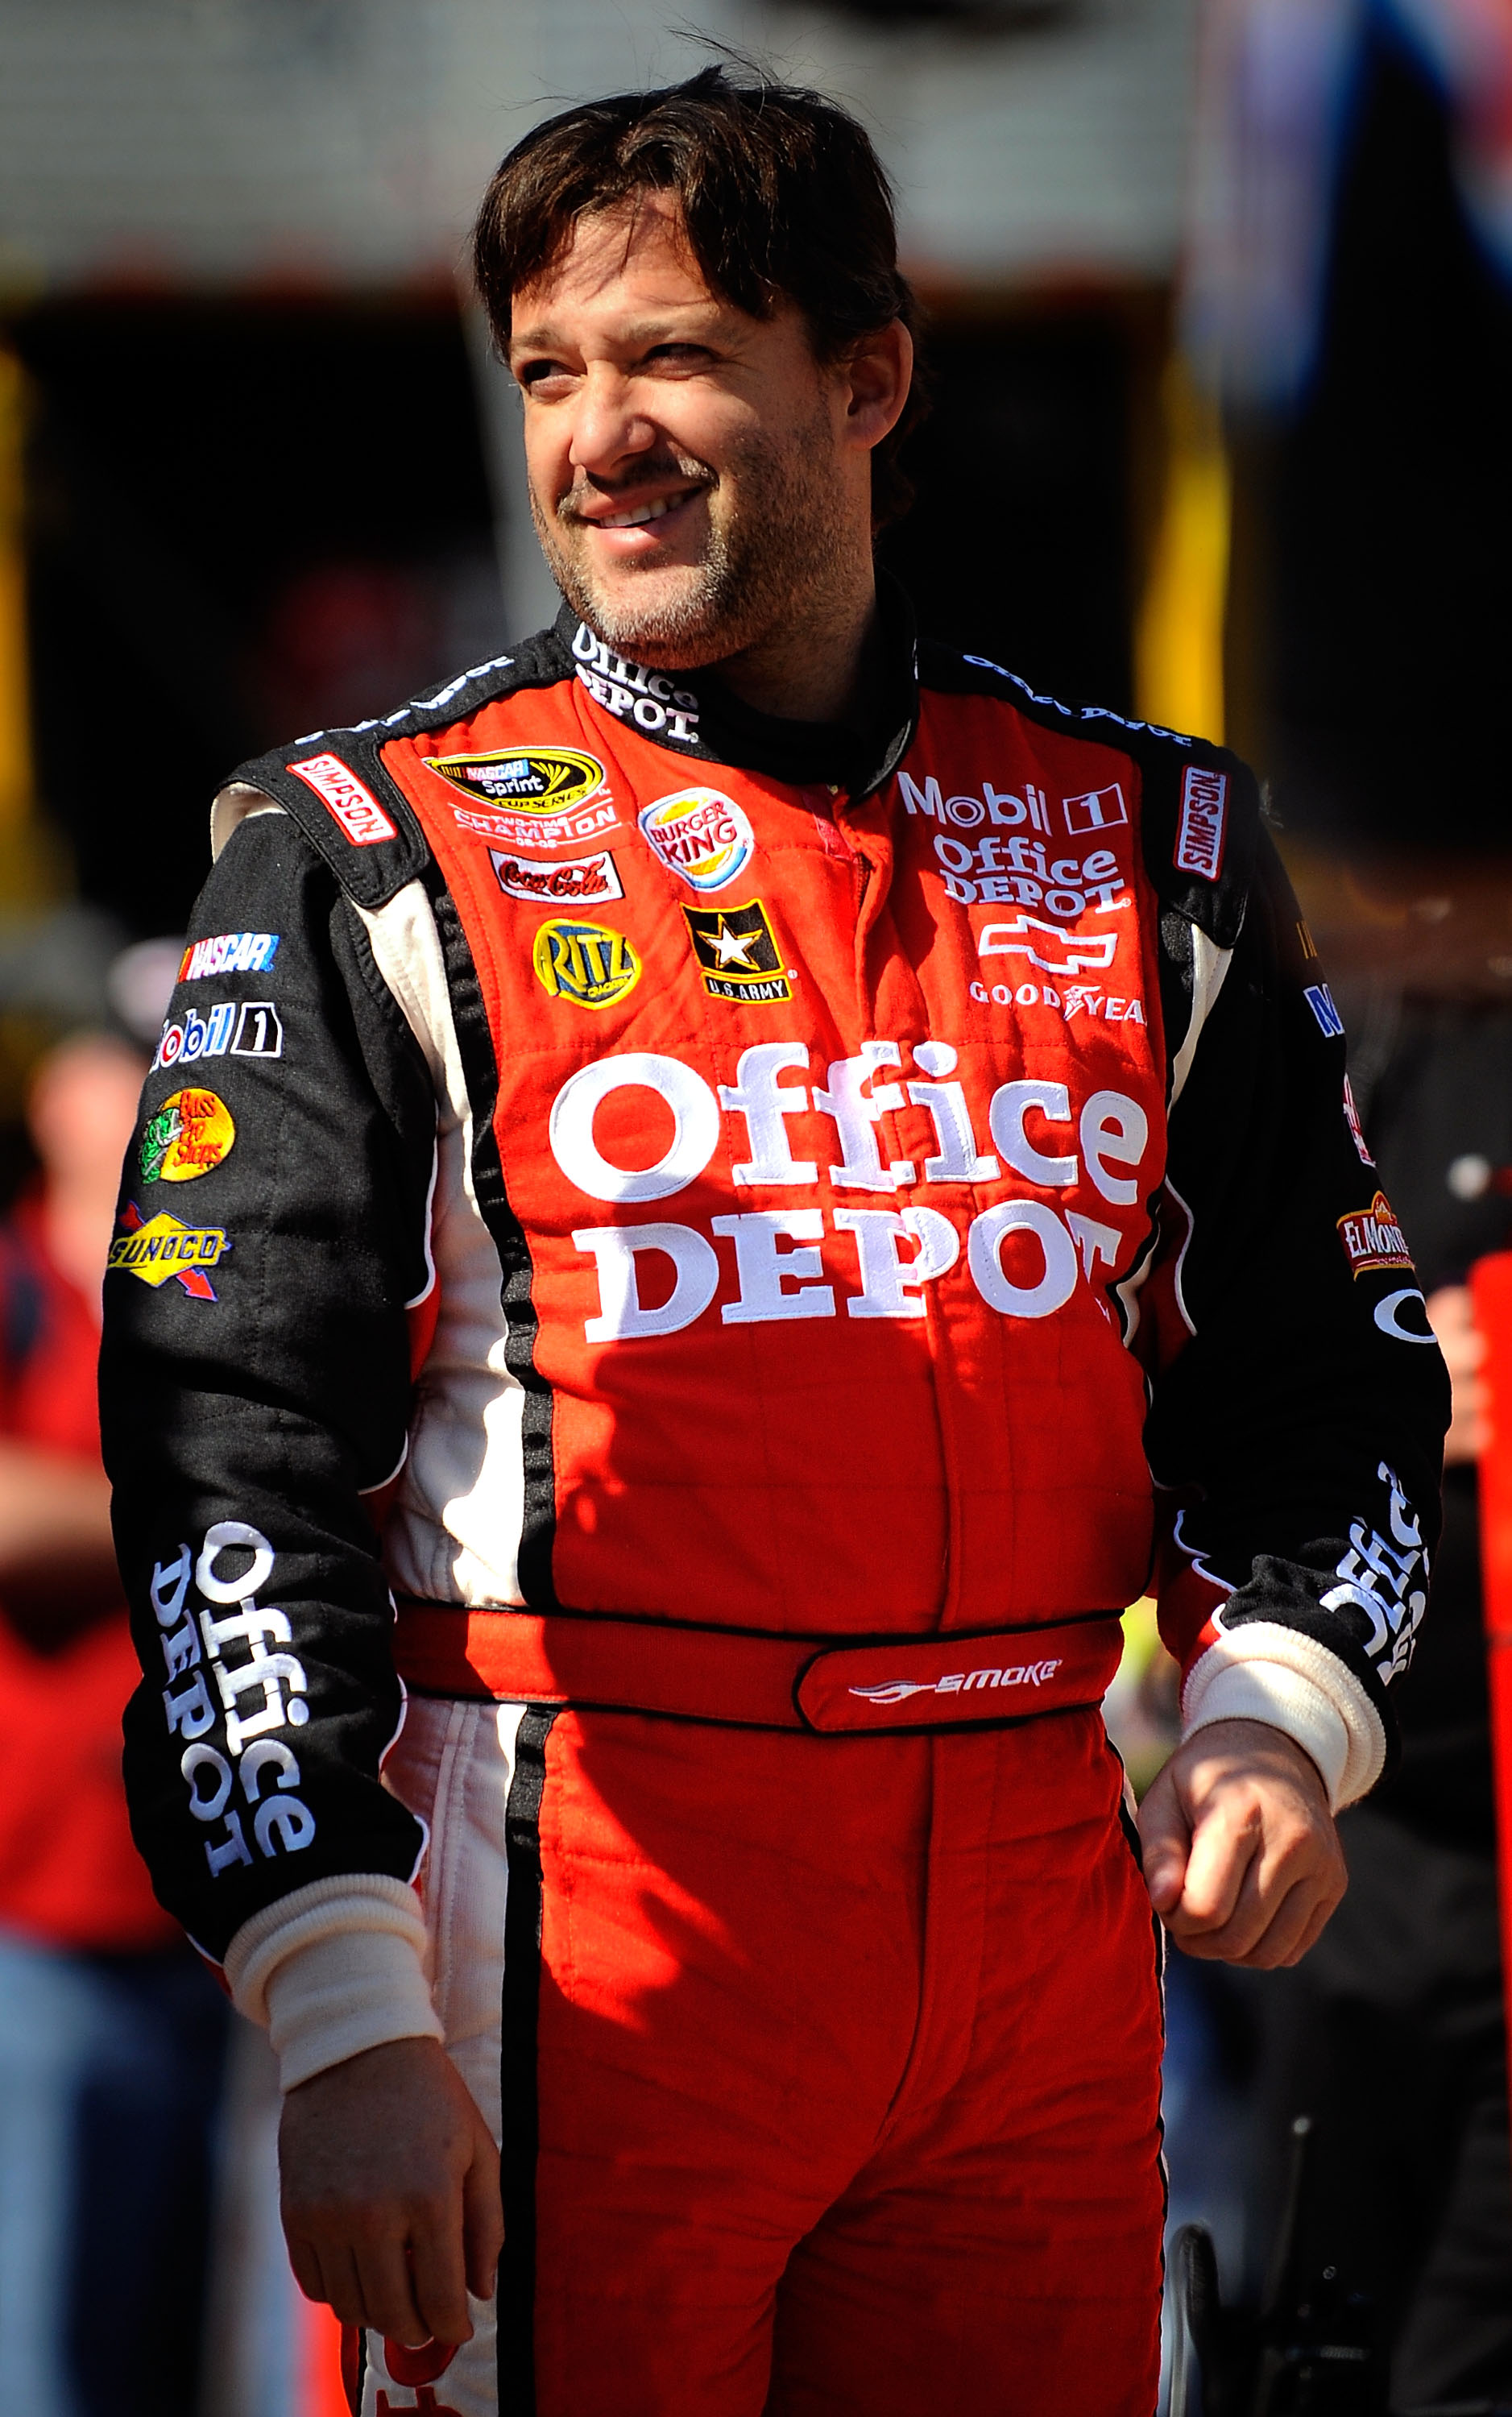 BRISTOL, TN - MARCH 19:  Tony Stewart, driver of the #14 Office Depot/Mobil 1 Chevrolet, walks in the garage area during practice for the NASCAR Sprint Cup Series Jeff Byrd 500 Presented By Food City at Bristol Motor Speedway on March 19, 2011 in Bristol,